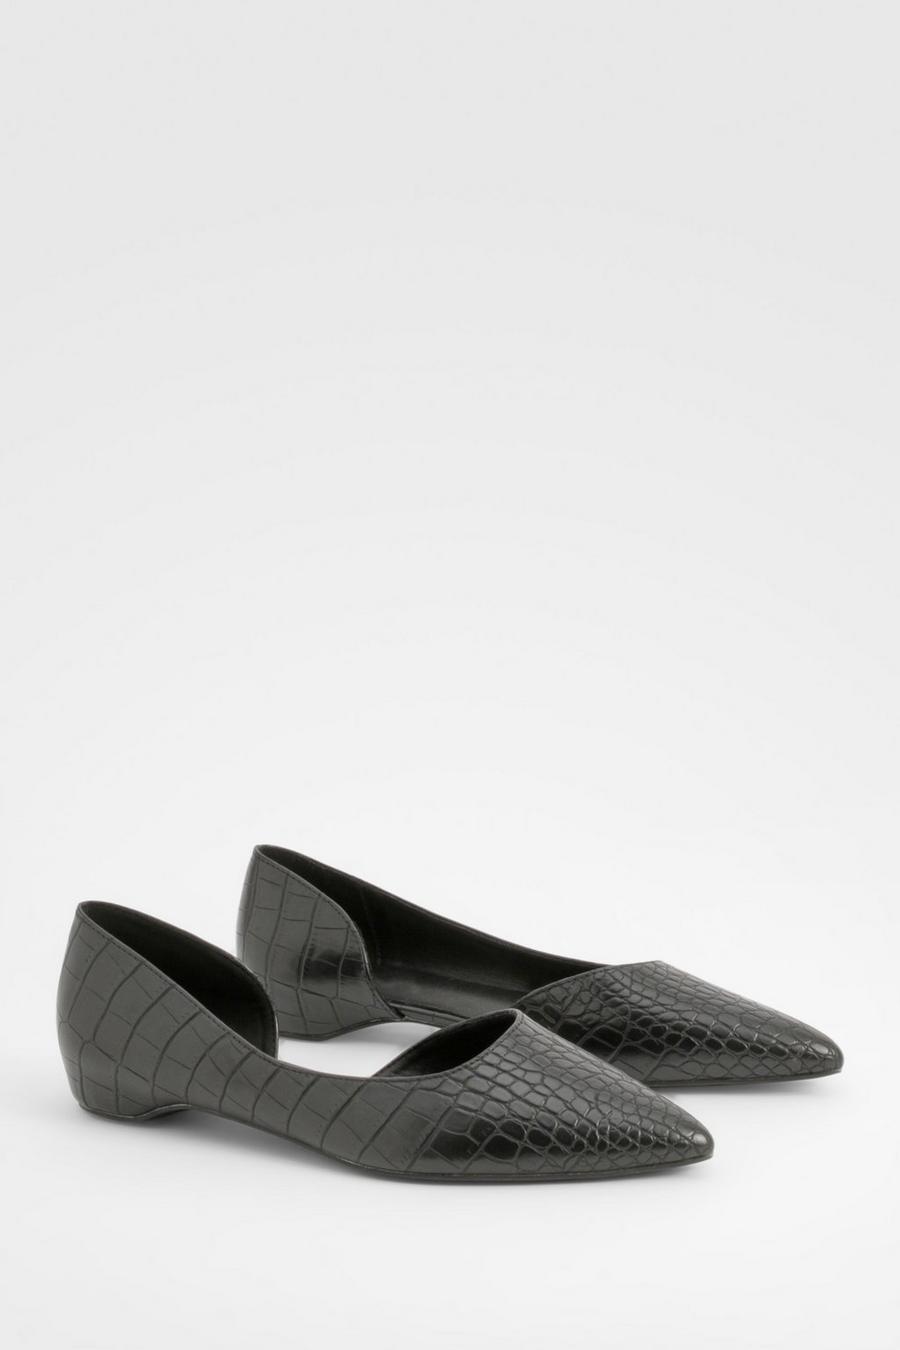 Black Wide Width Cut Out Croc Pointed Flats image number 1